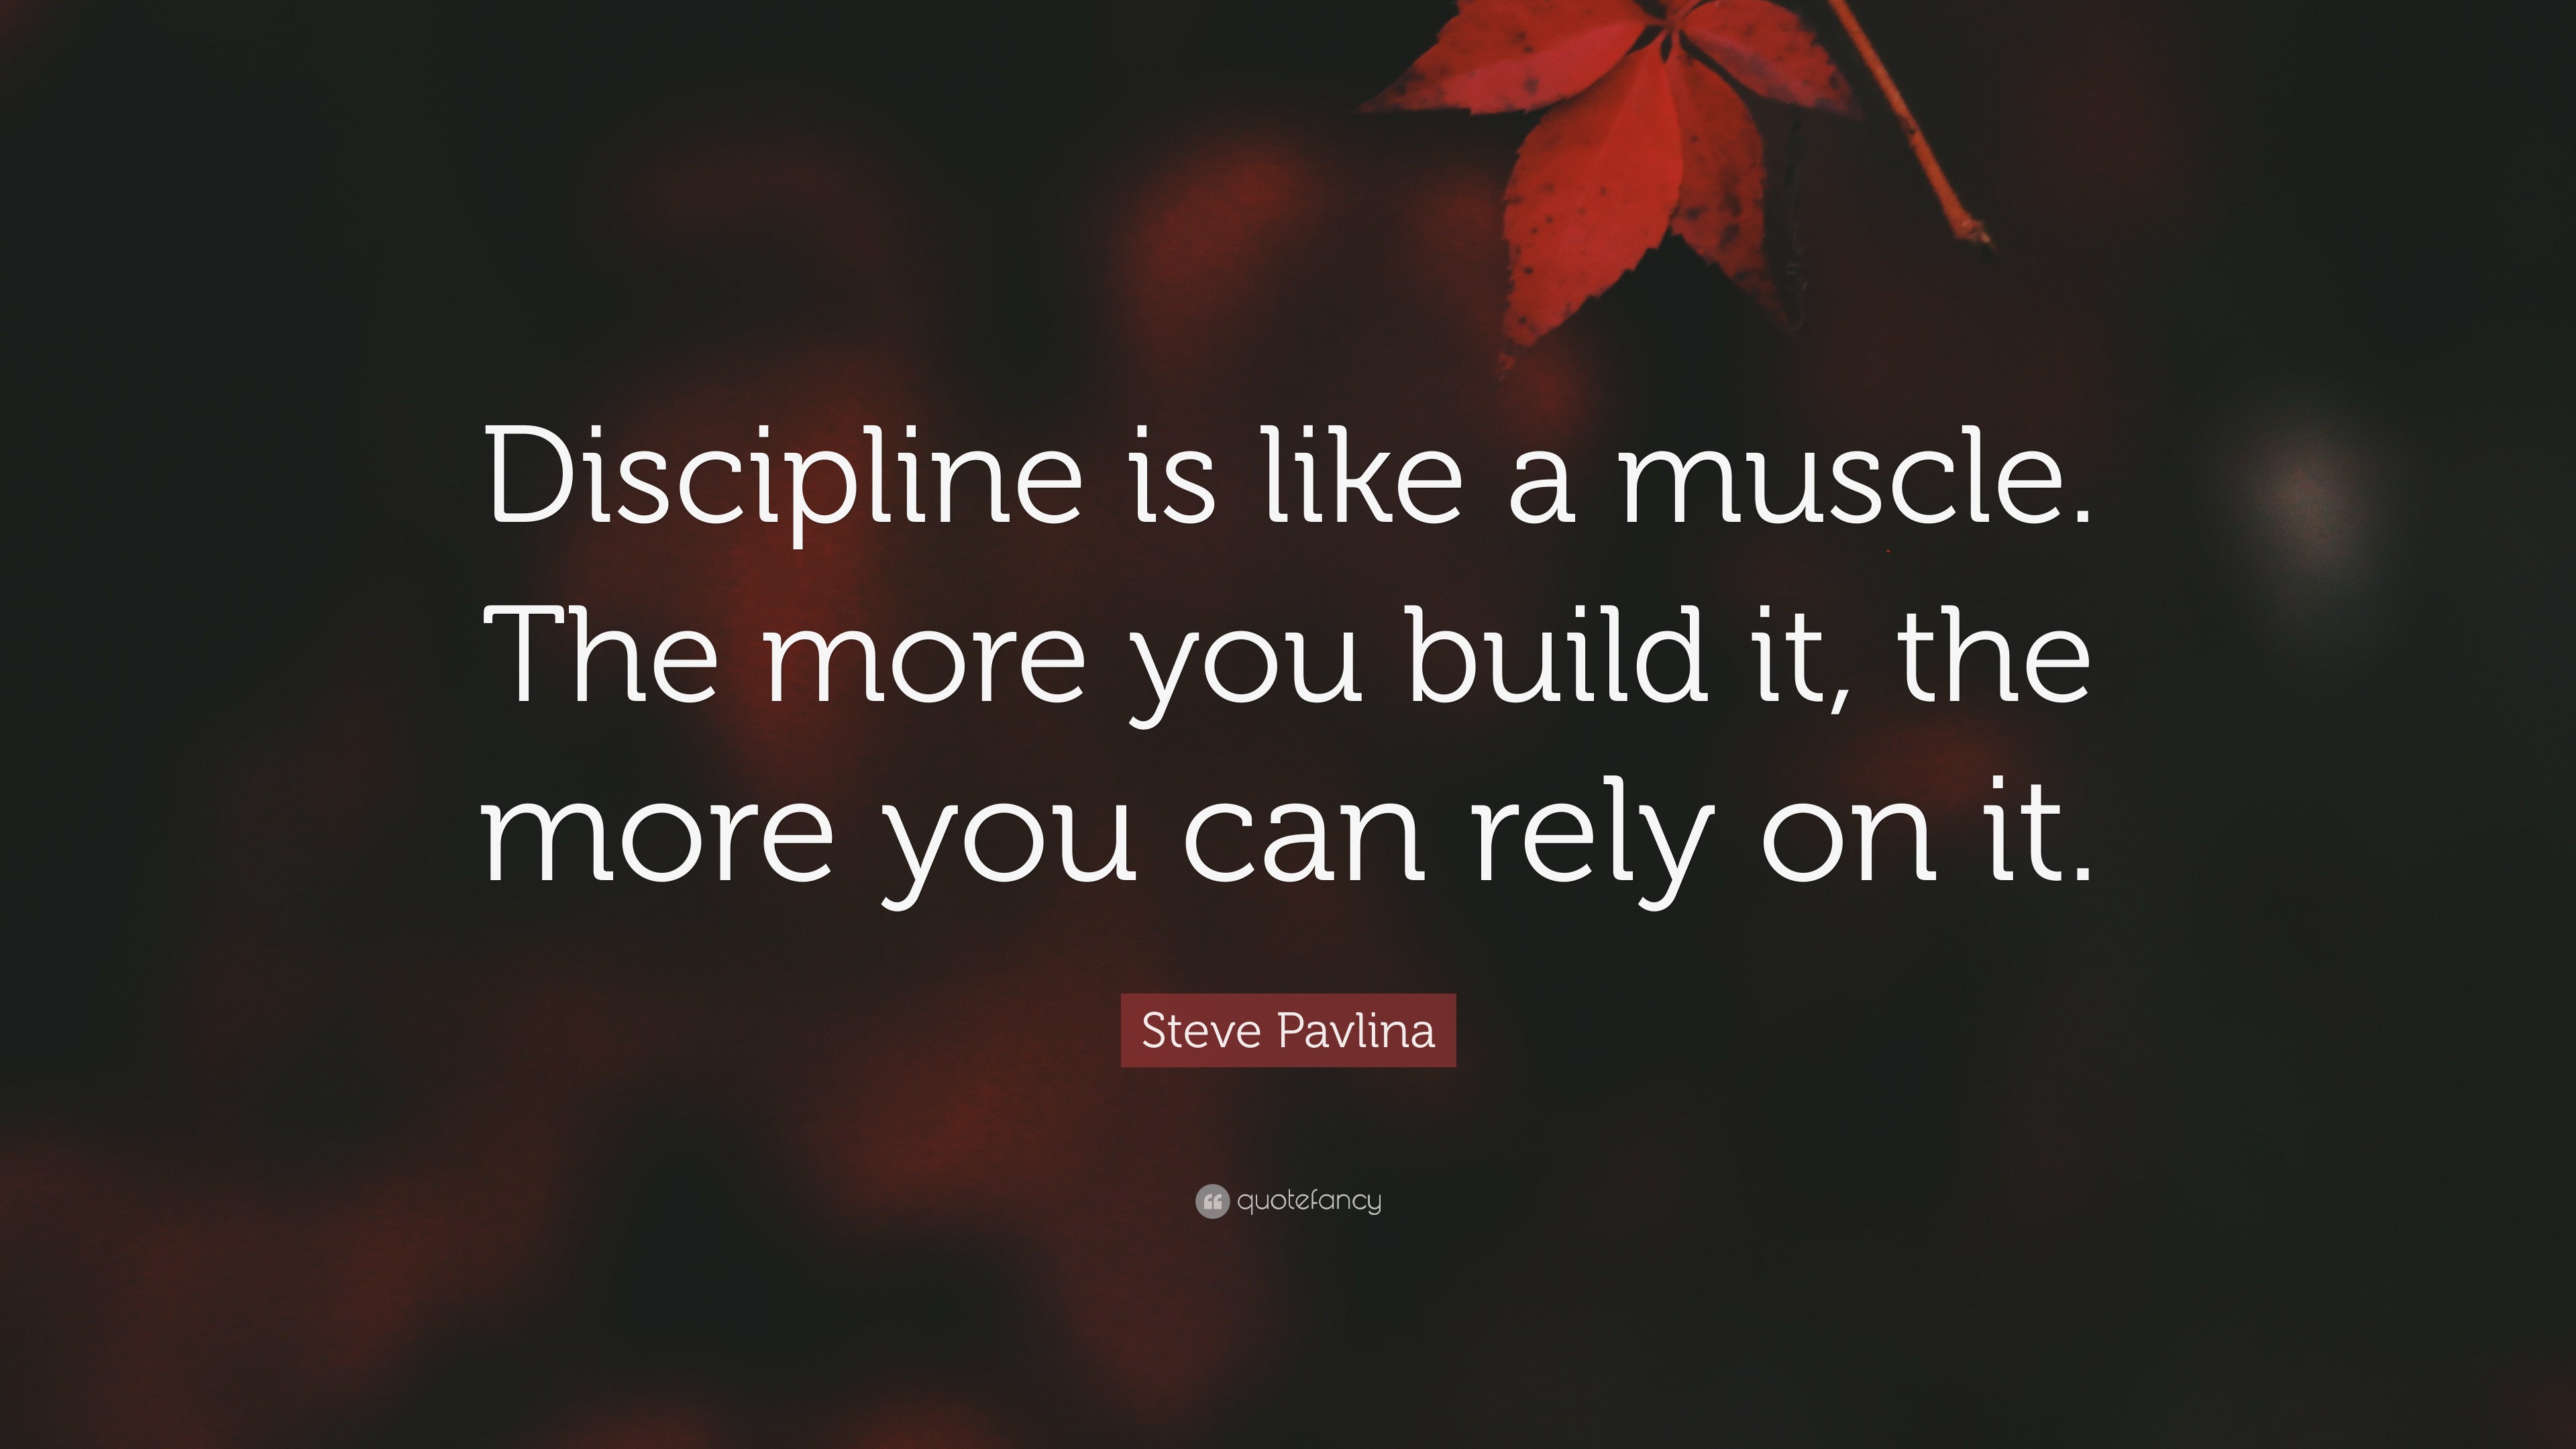 Steve Pavlina Quote: “Discipline is like a muscle. The more you build ...